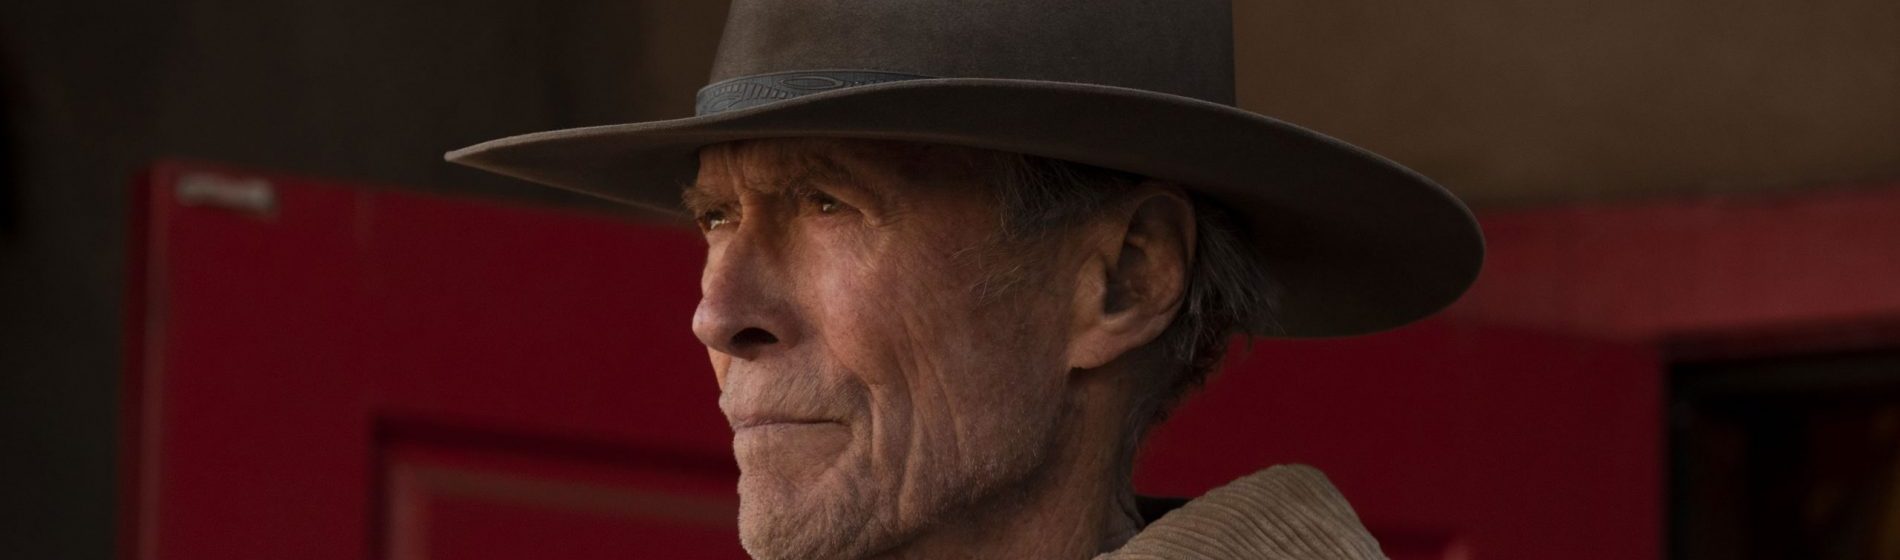 Clint Eastwood in Cry Macho